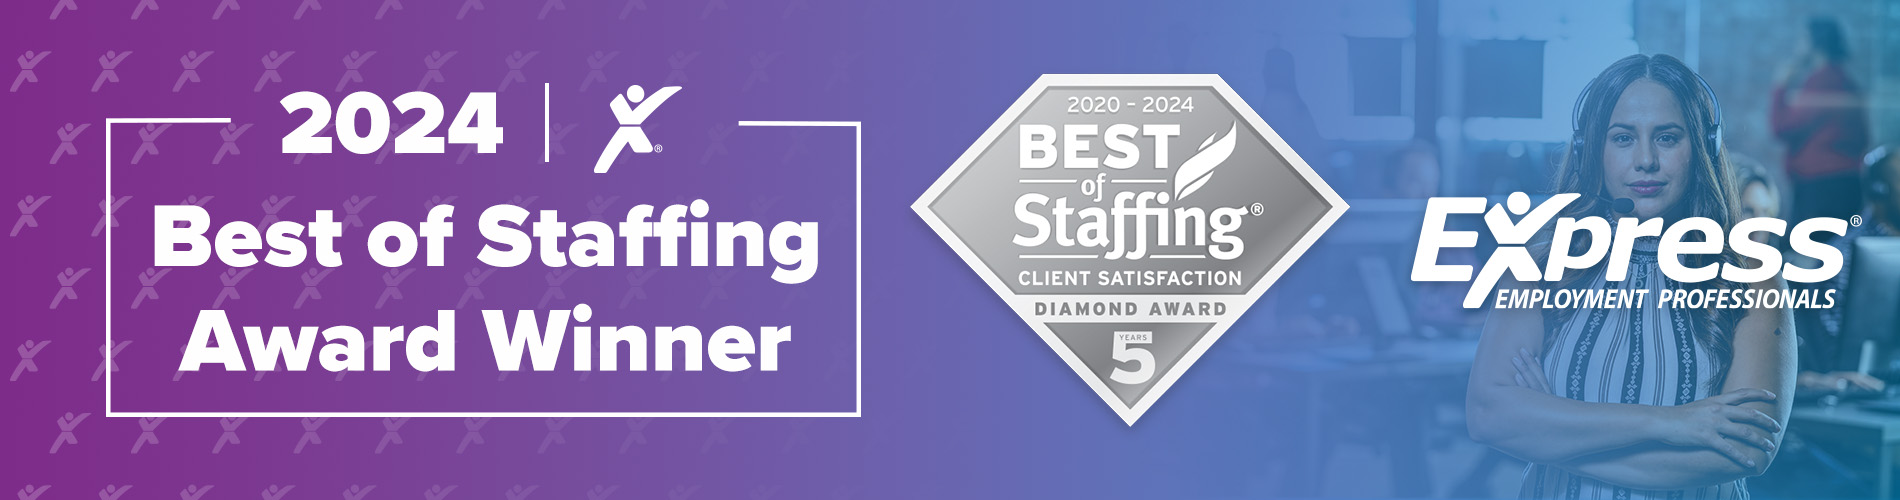 Best-of-Staffing-Client-Award-Home-Banner-2024